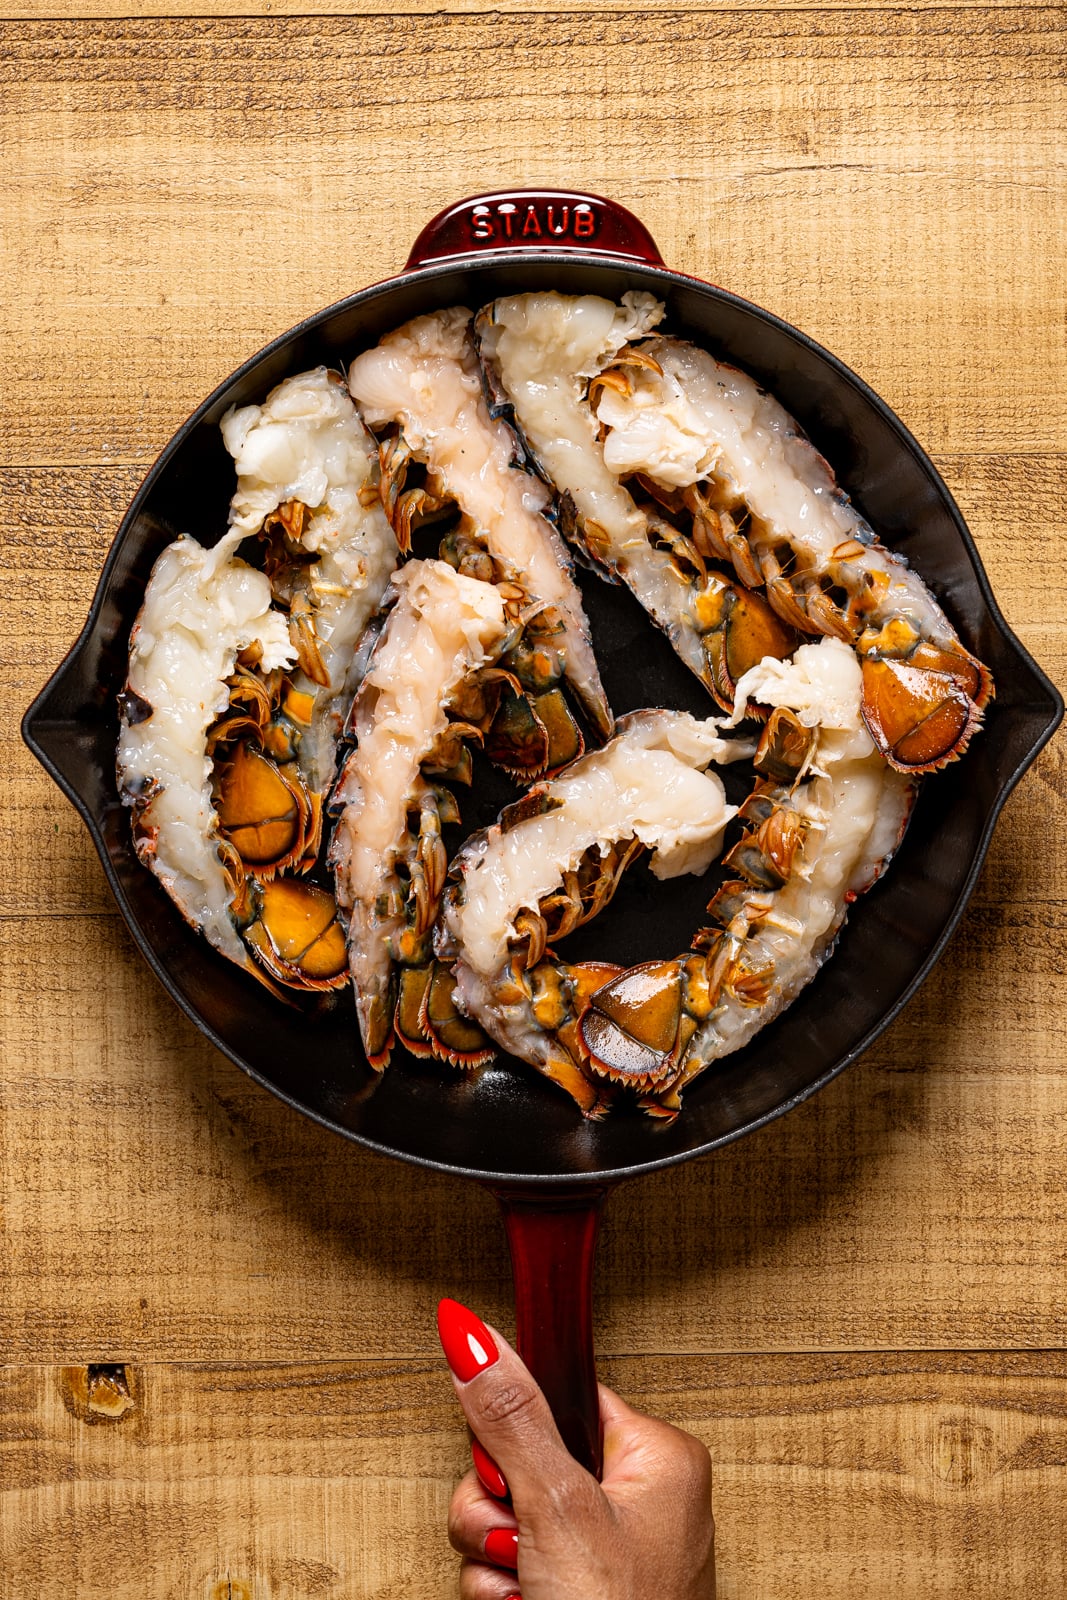 Lobster tails prepped in a skillet.